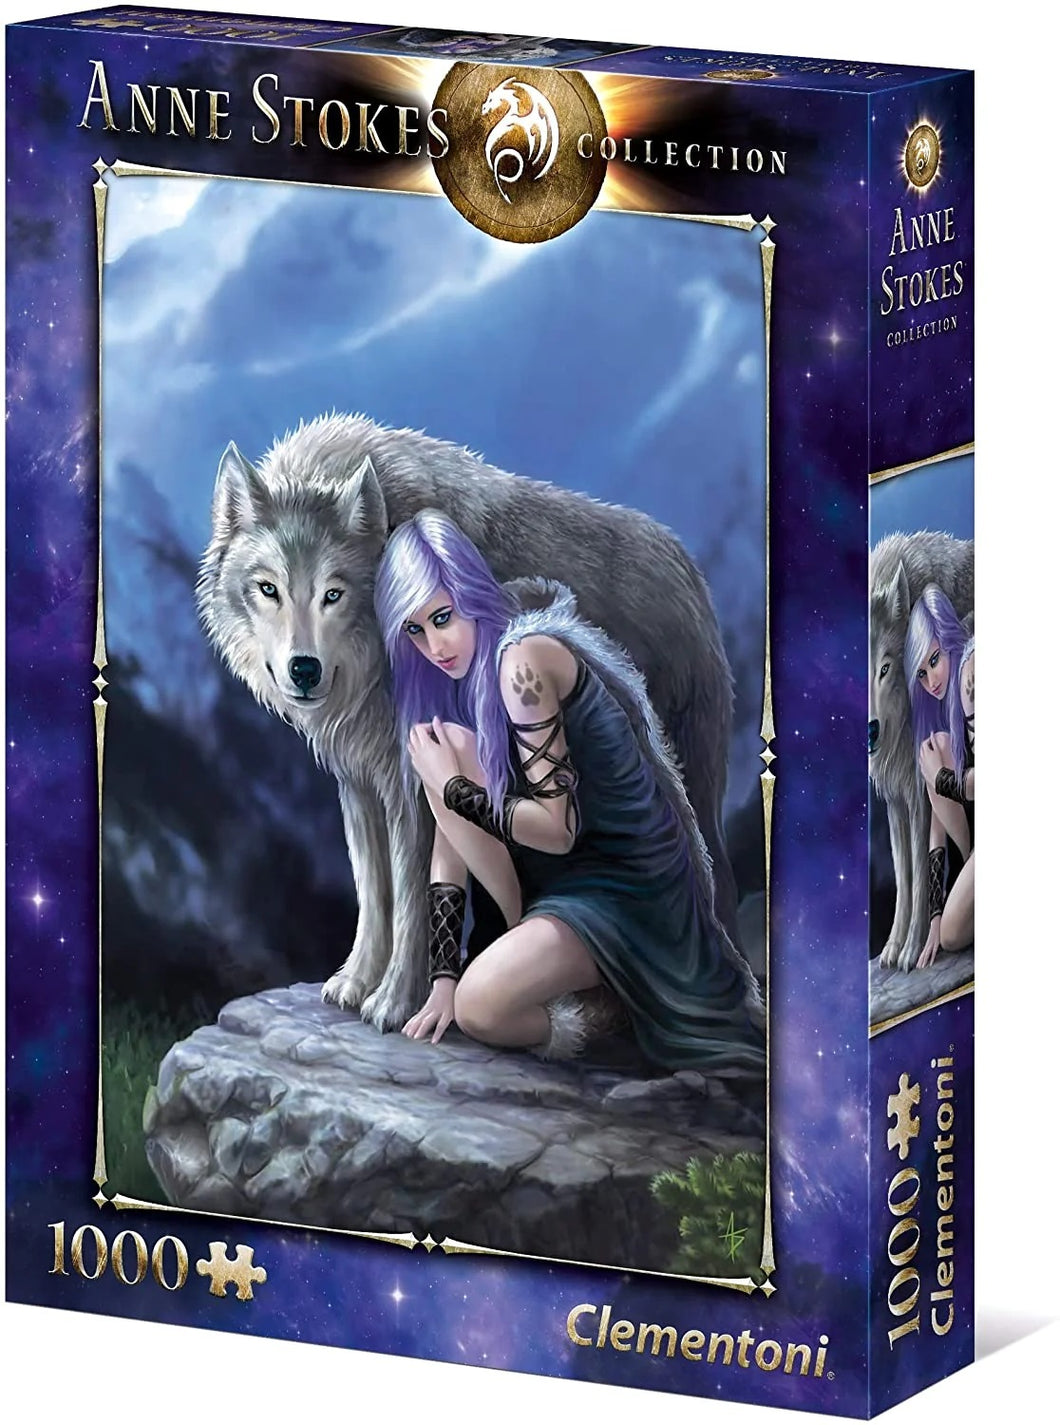 Protector - 1000pc Jigsaw Puzzle - Anne Stokes - Clementoni